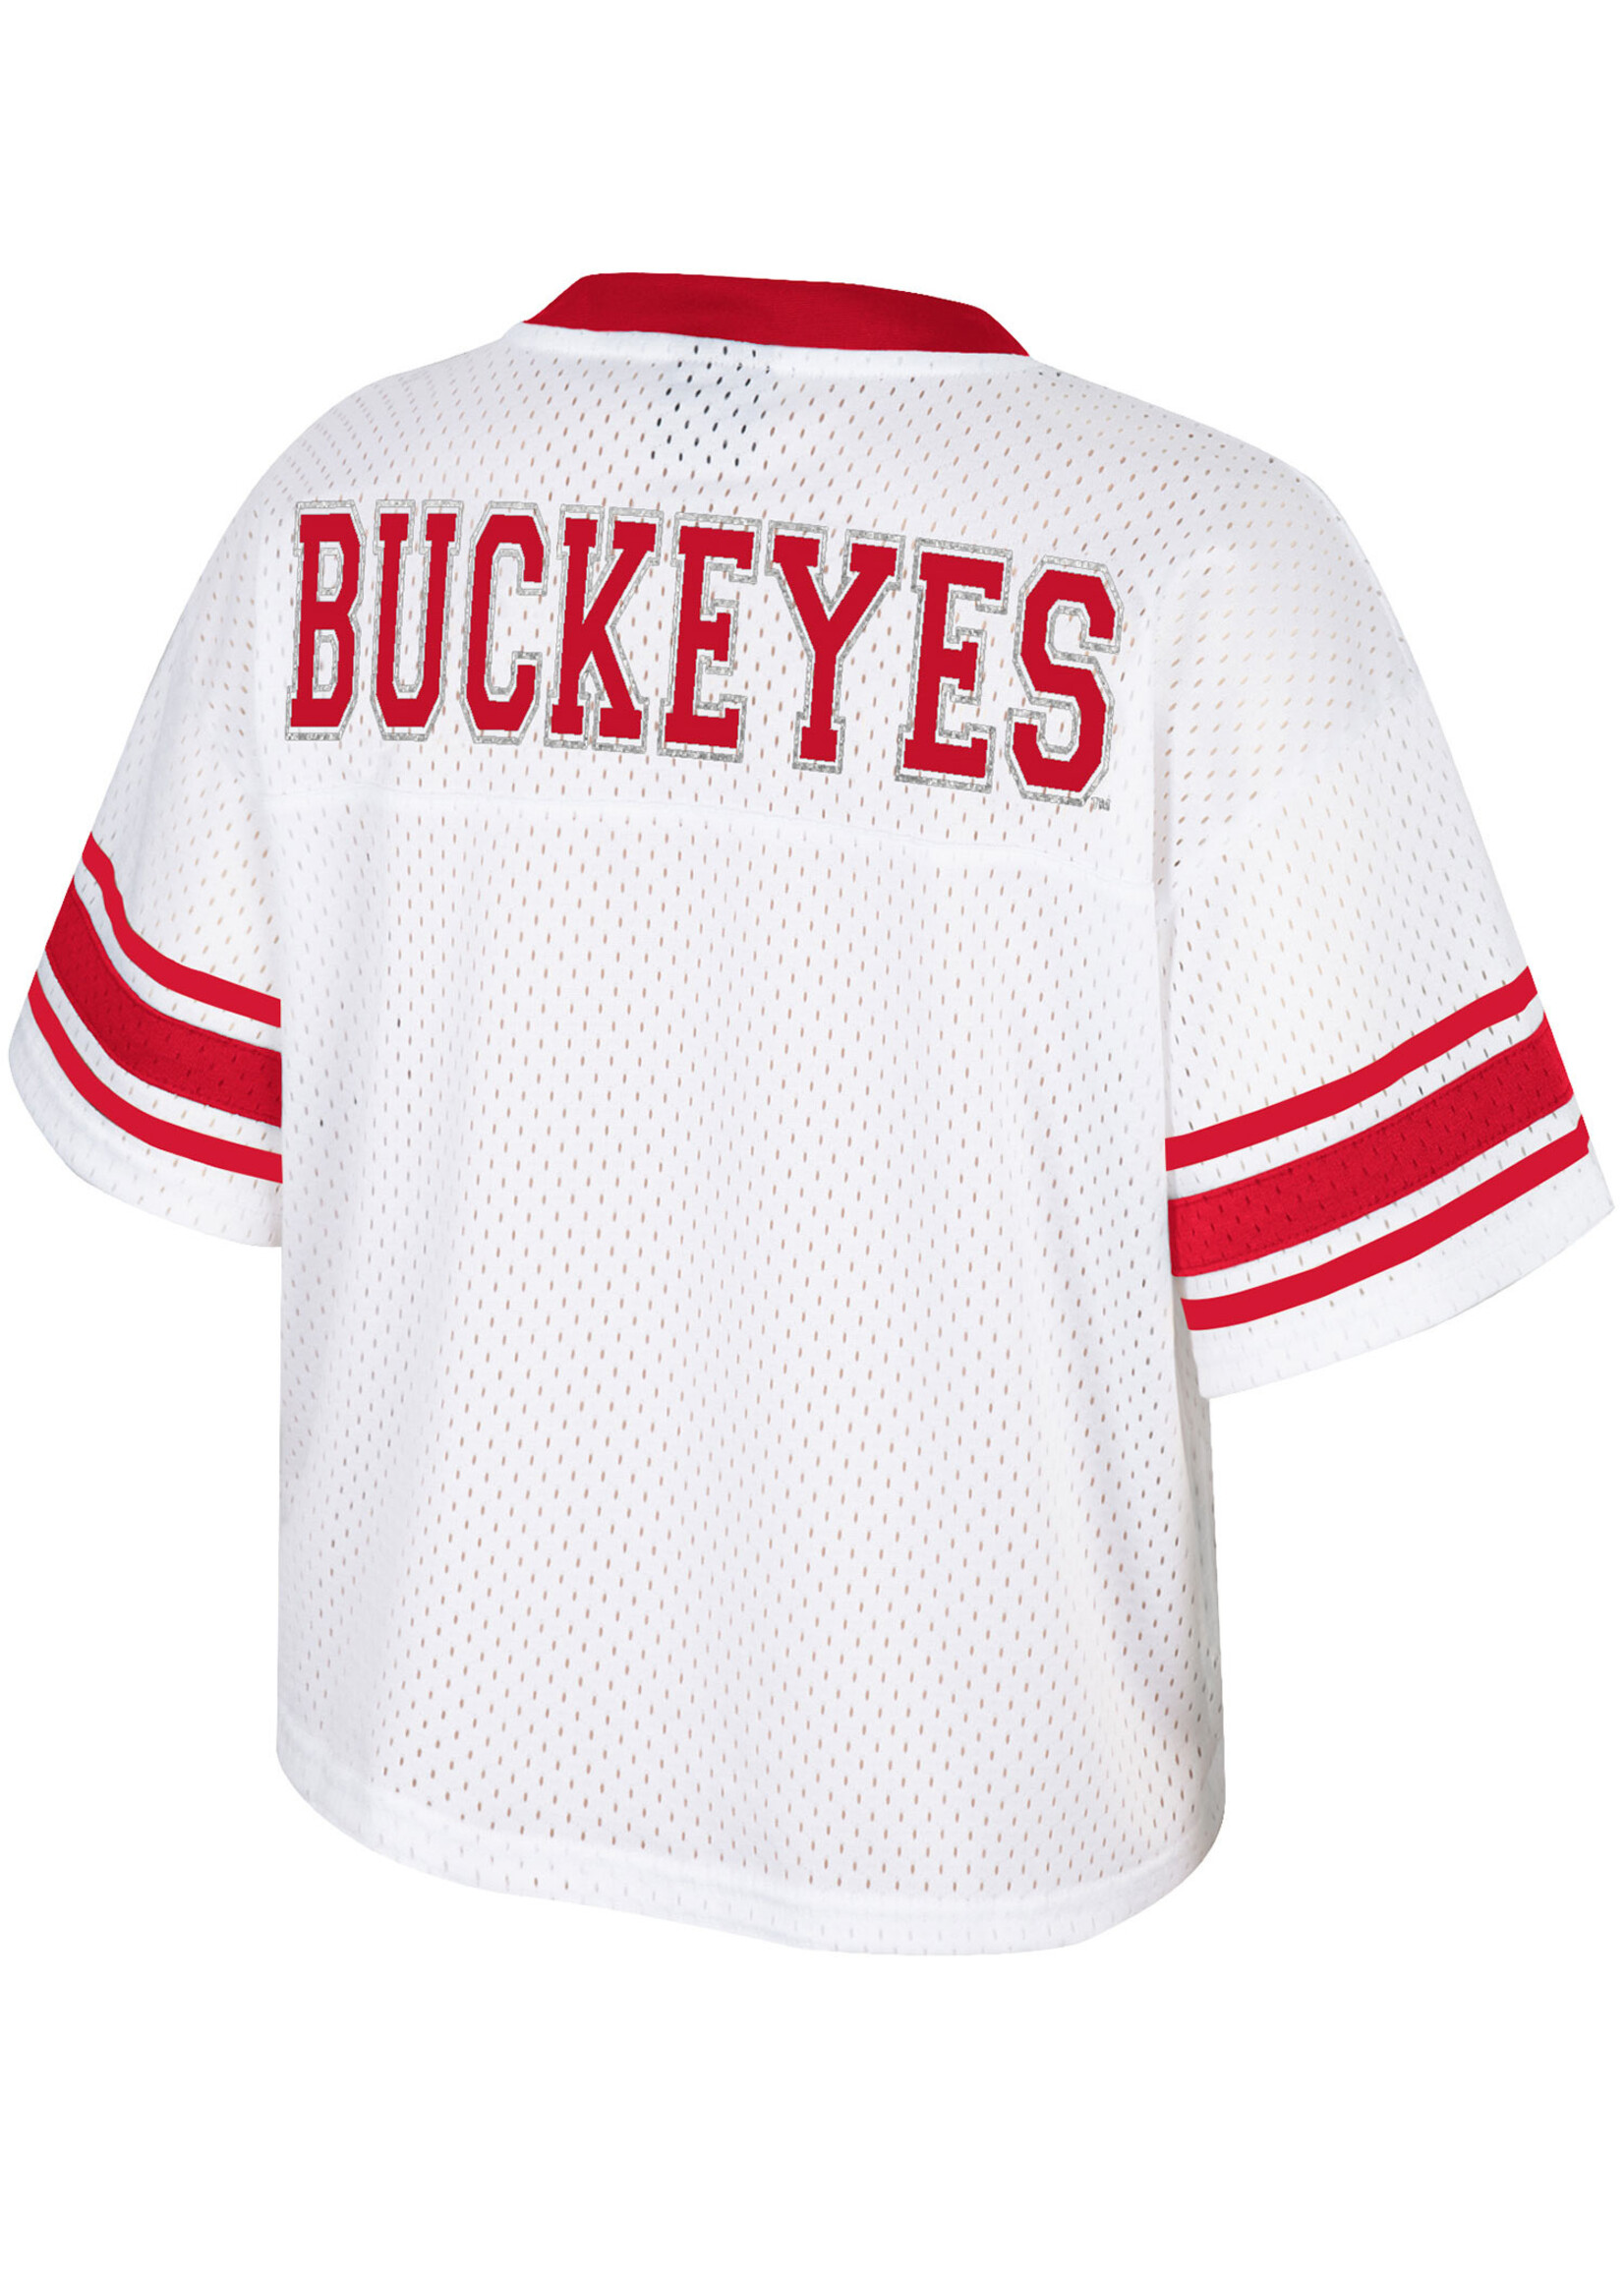 Colosseum Athletics Women's Ohio State Buckeyes Cropped Jersey - White - S Each